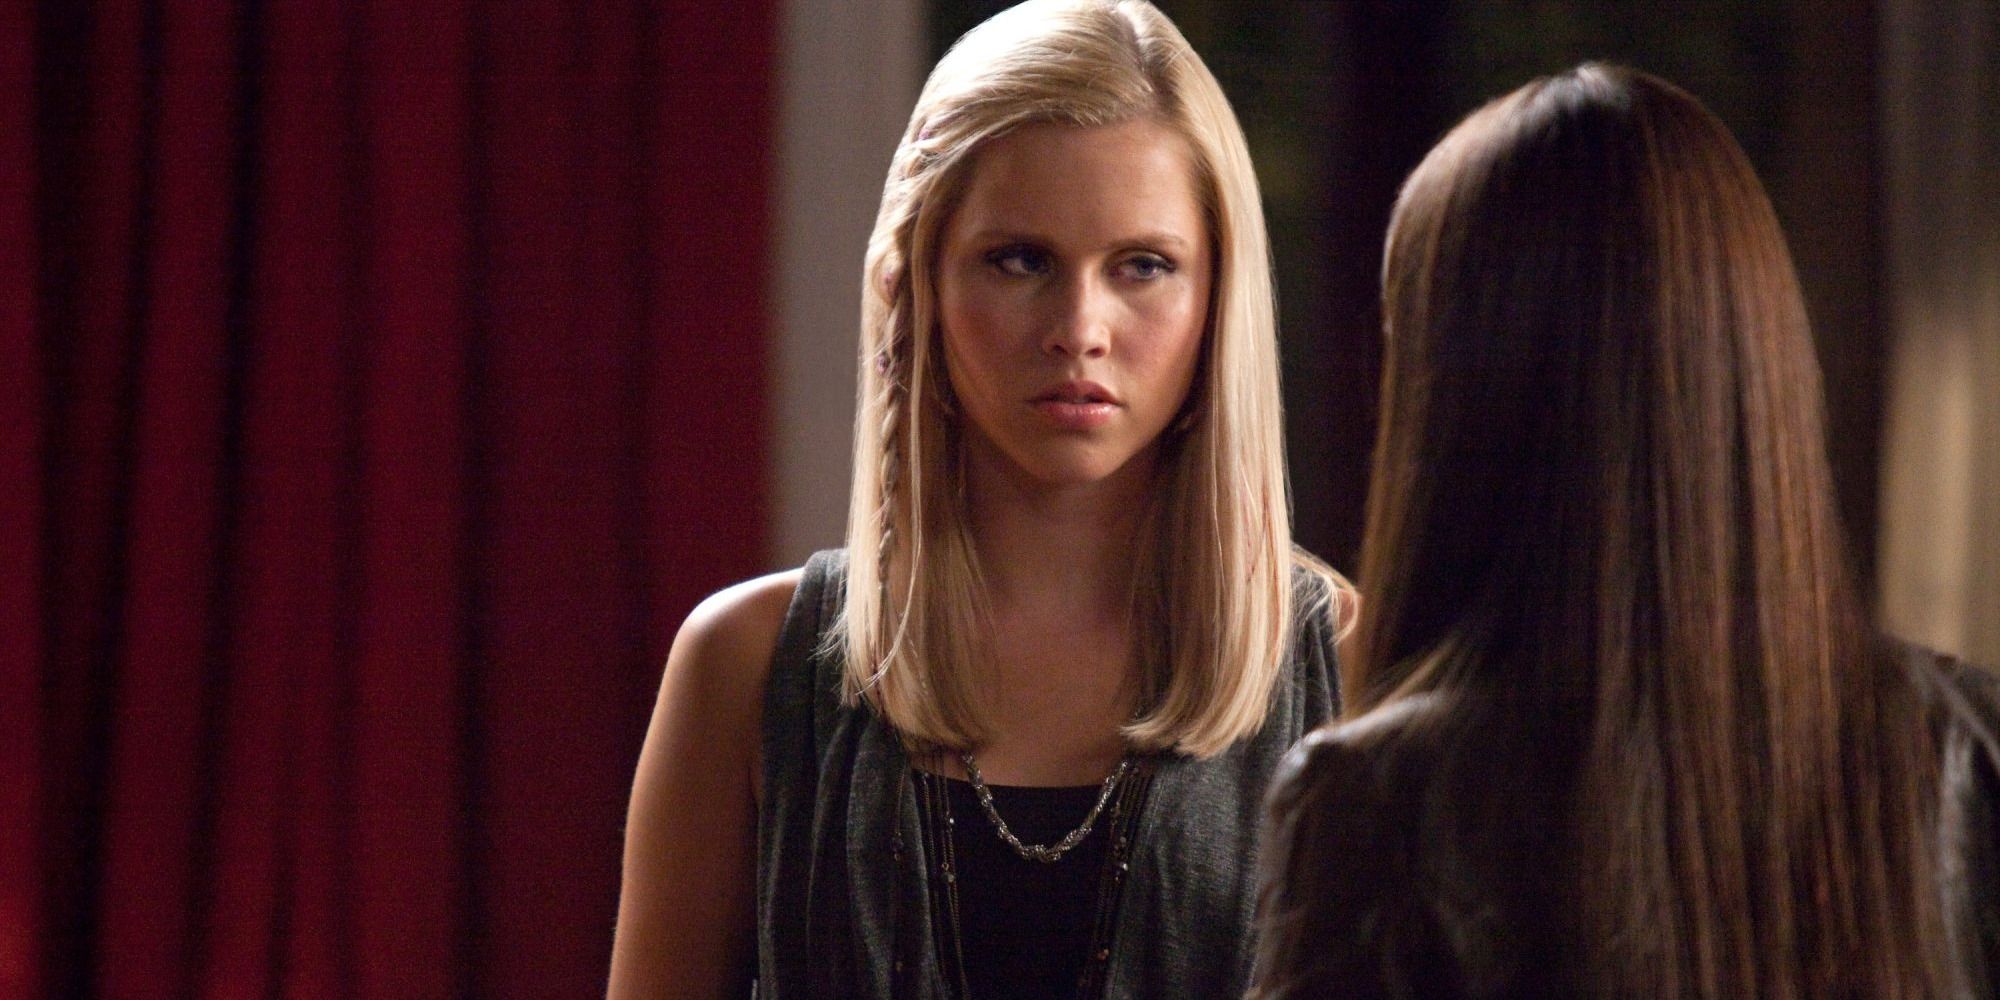 The Originals The 5 Worst Things Klaus Did To Rebekah (& 5 Worst Things She Did To Him)